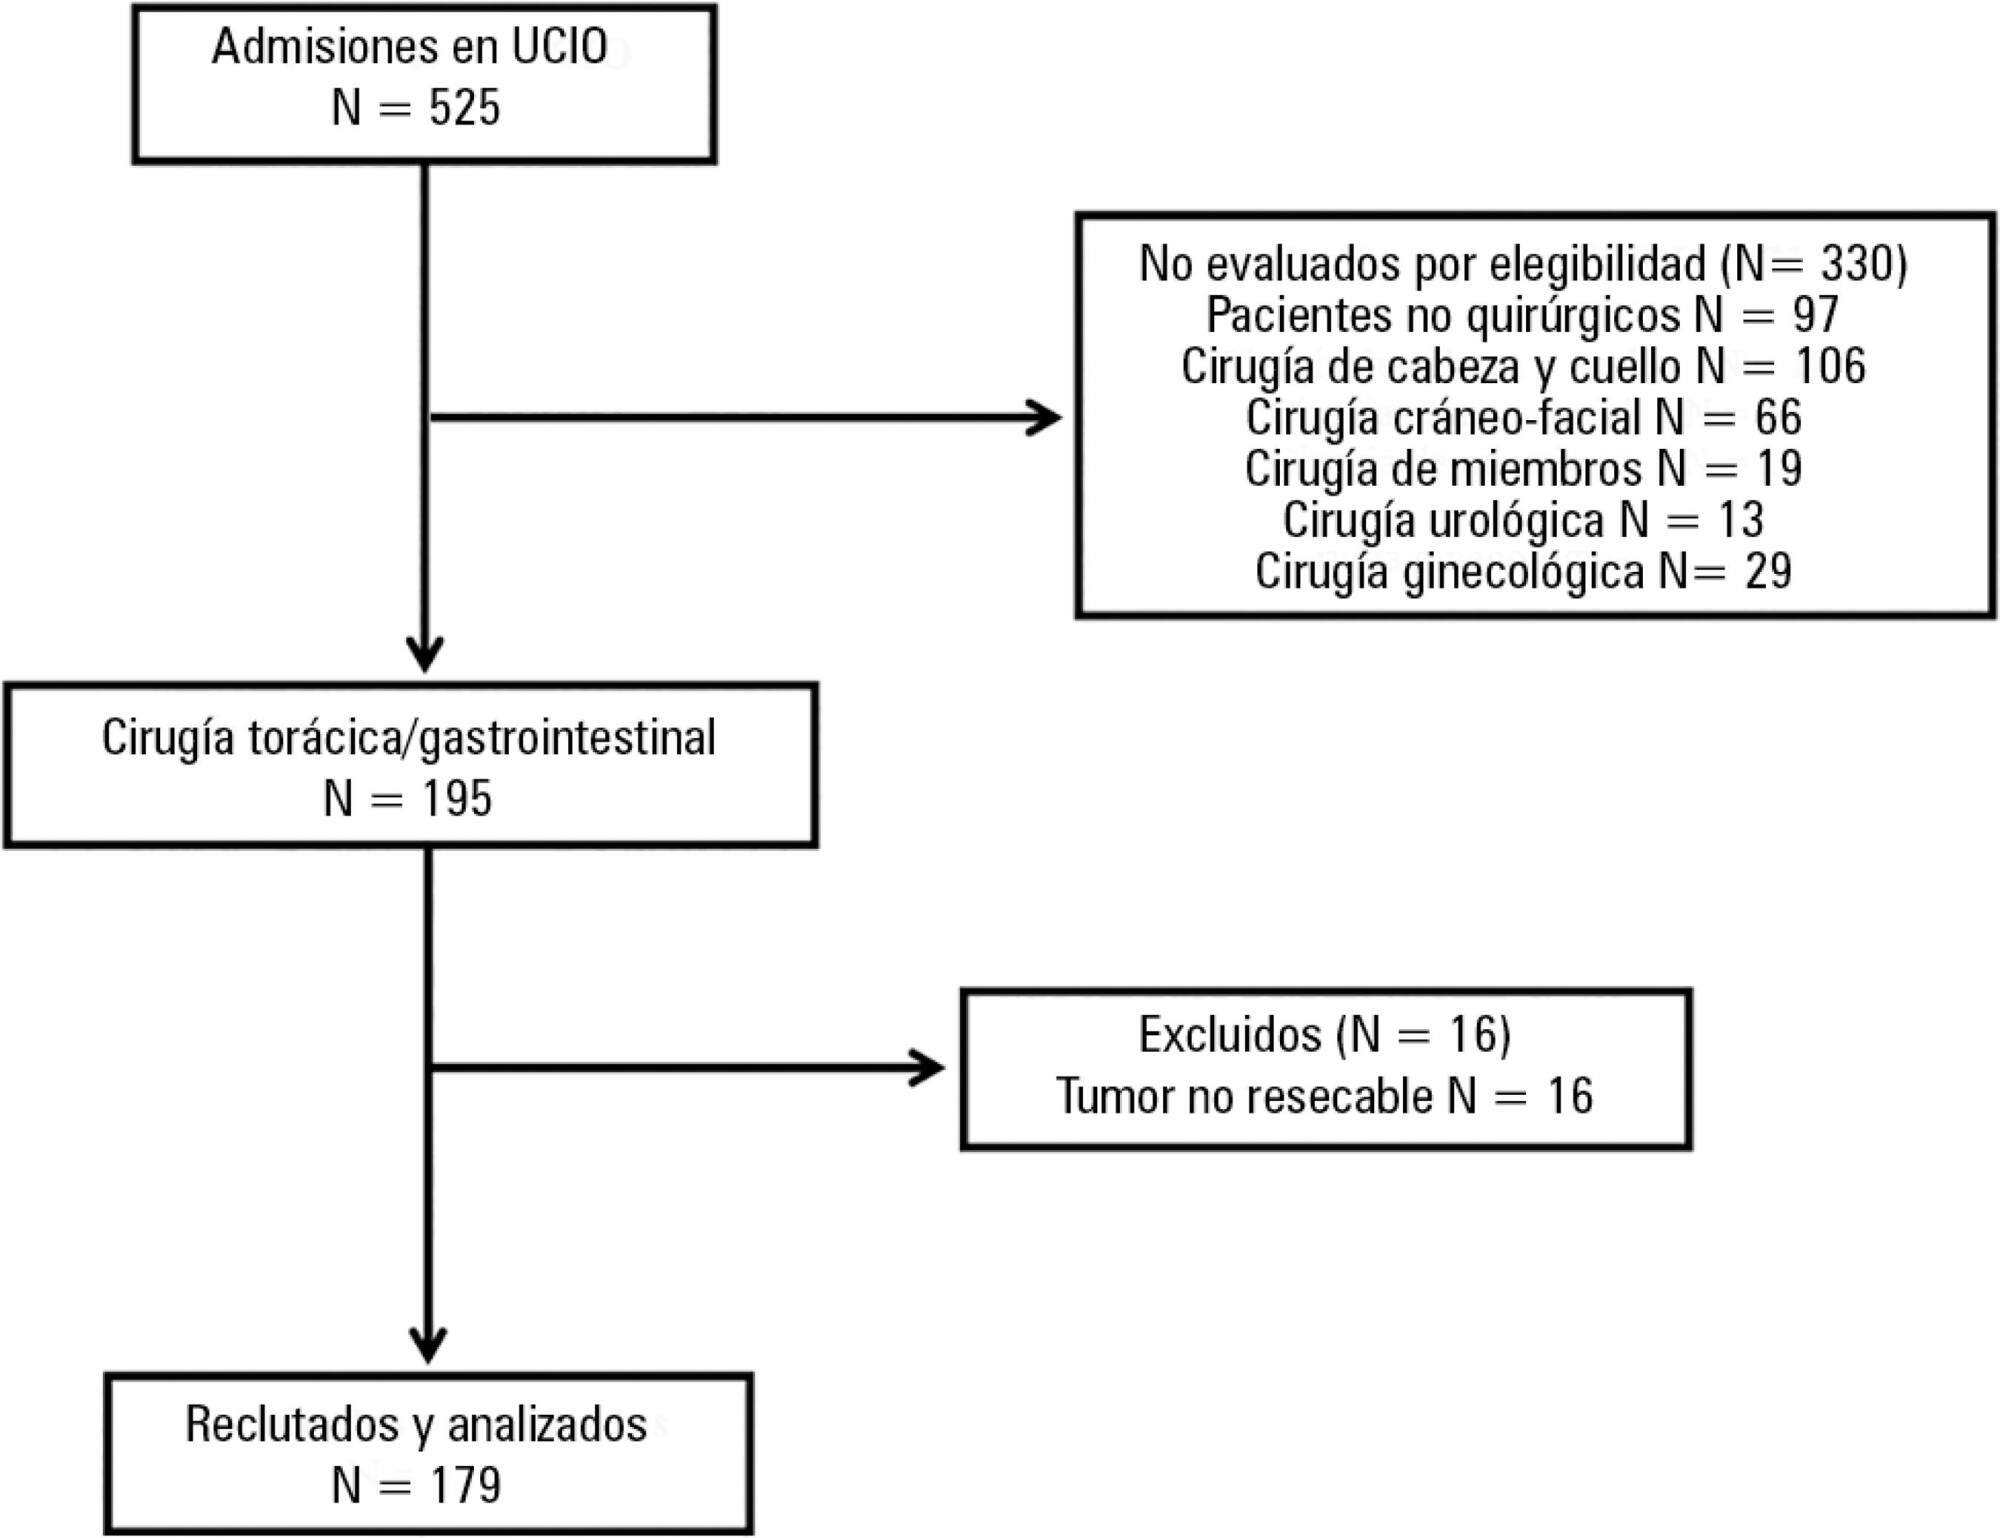 Postoperative complications and clinical outcomes among patients undergoing thoracic and gastrointestinal cancer surgery: A prospective cohort study